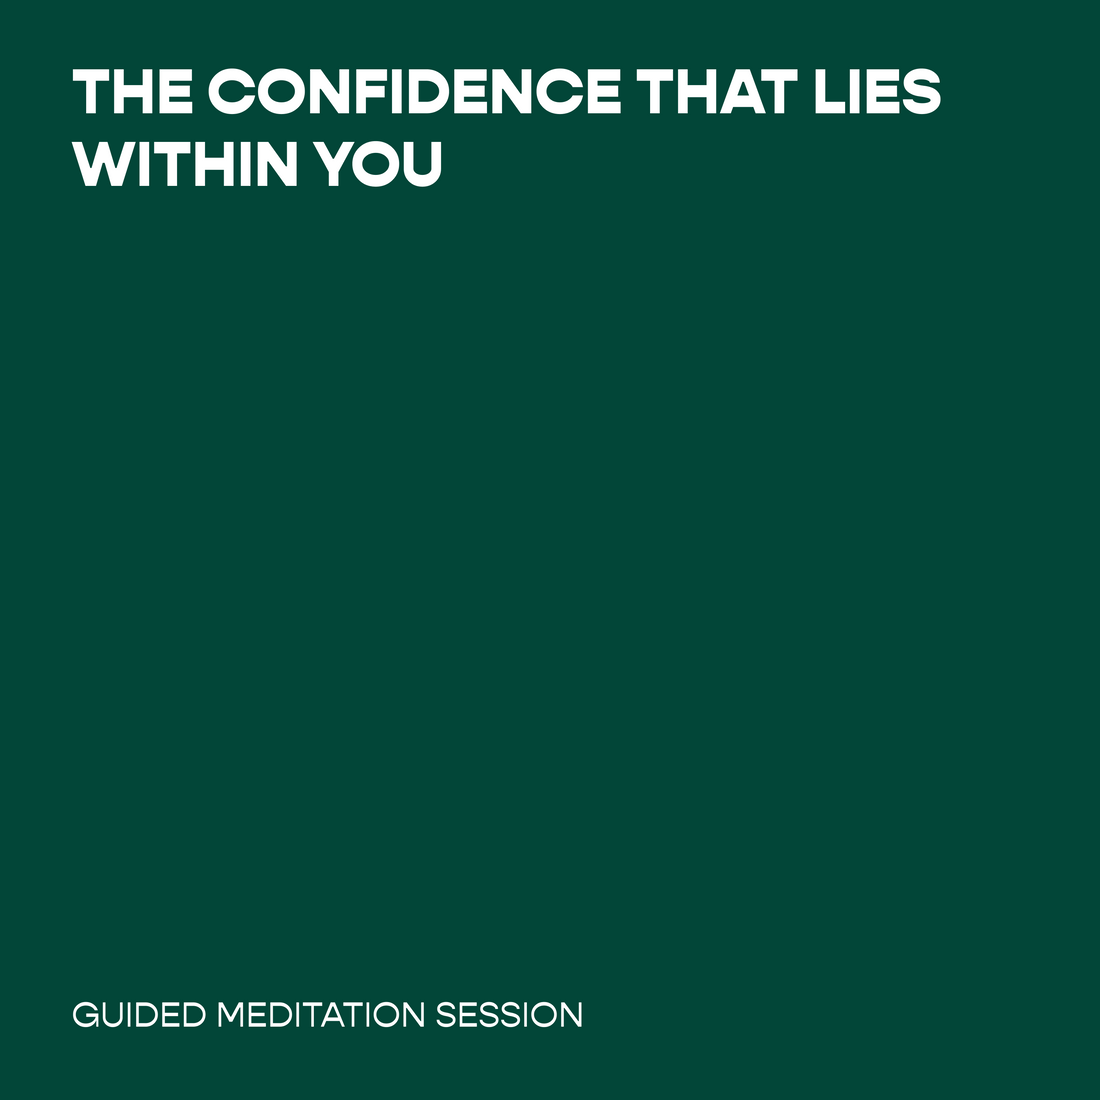 The Confidence that Lies Within You